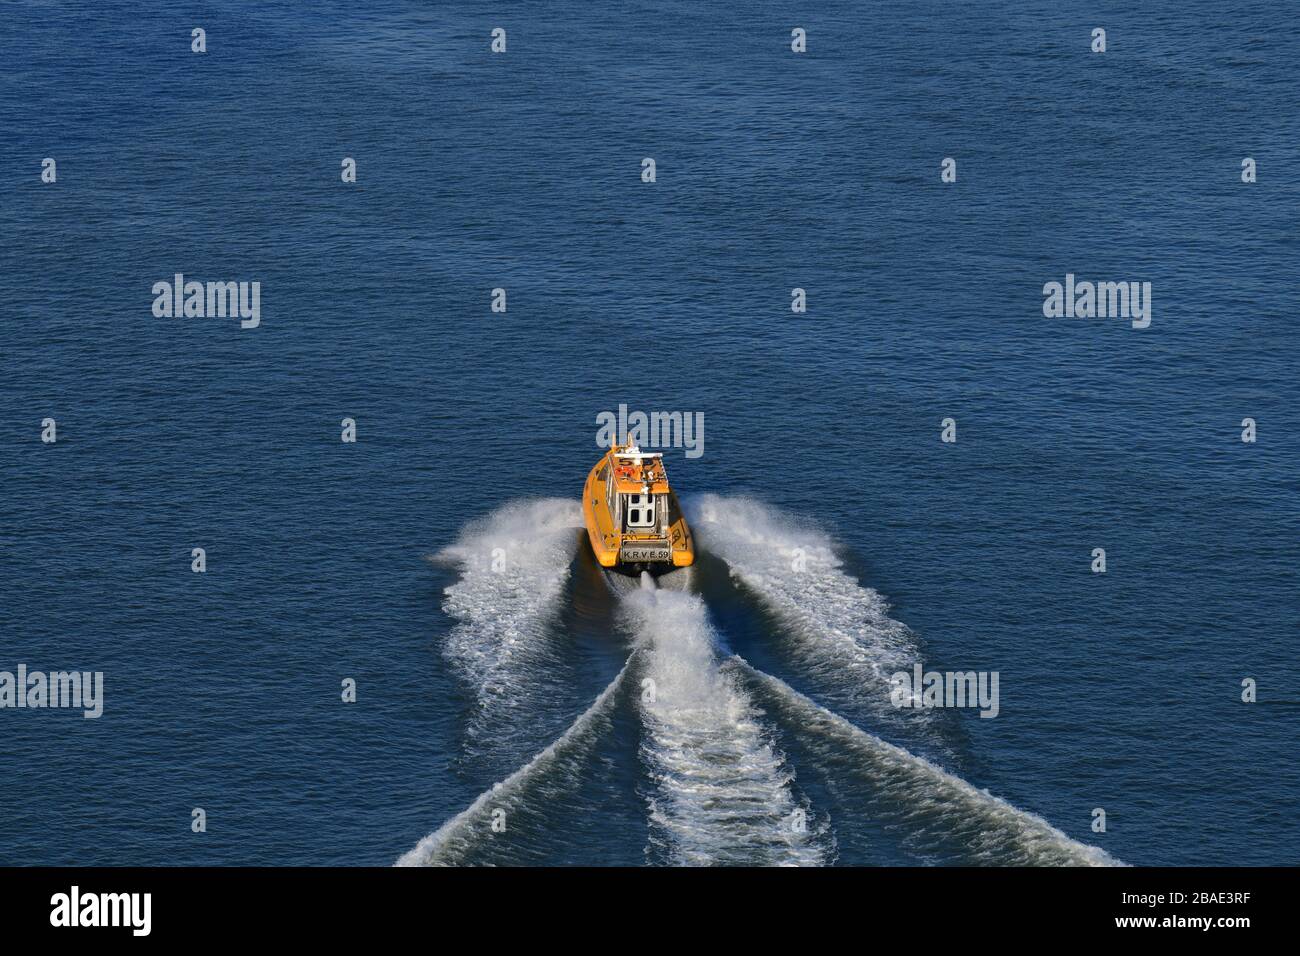 Rear high angle view of bright yellow pilot boat speeding away leaving a wide wake in the water Stock Photo